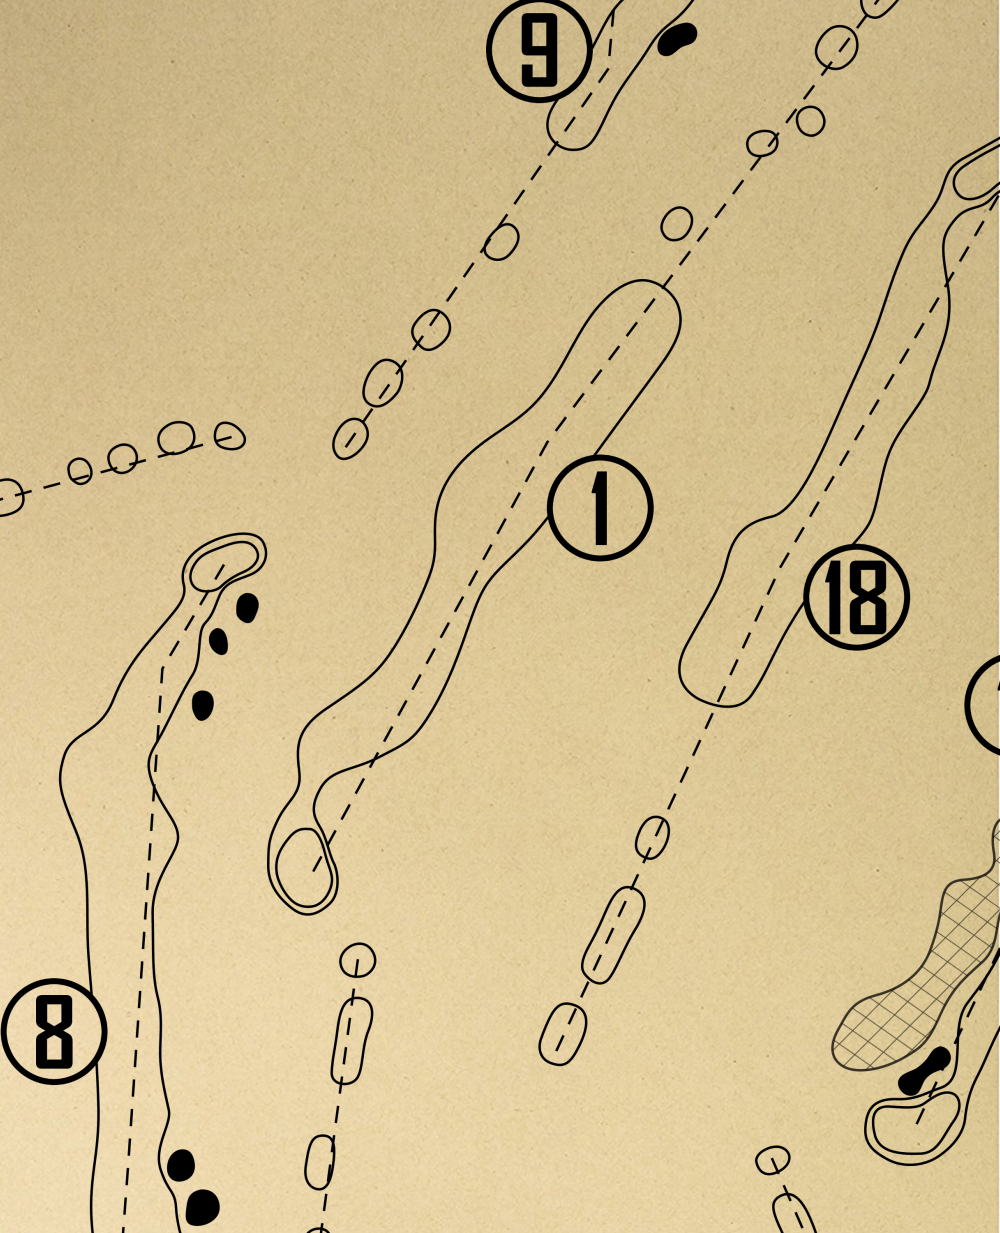 Riverpines Golf Course Outline (Print)